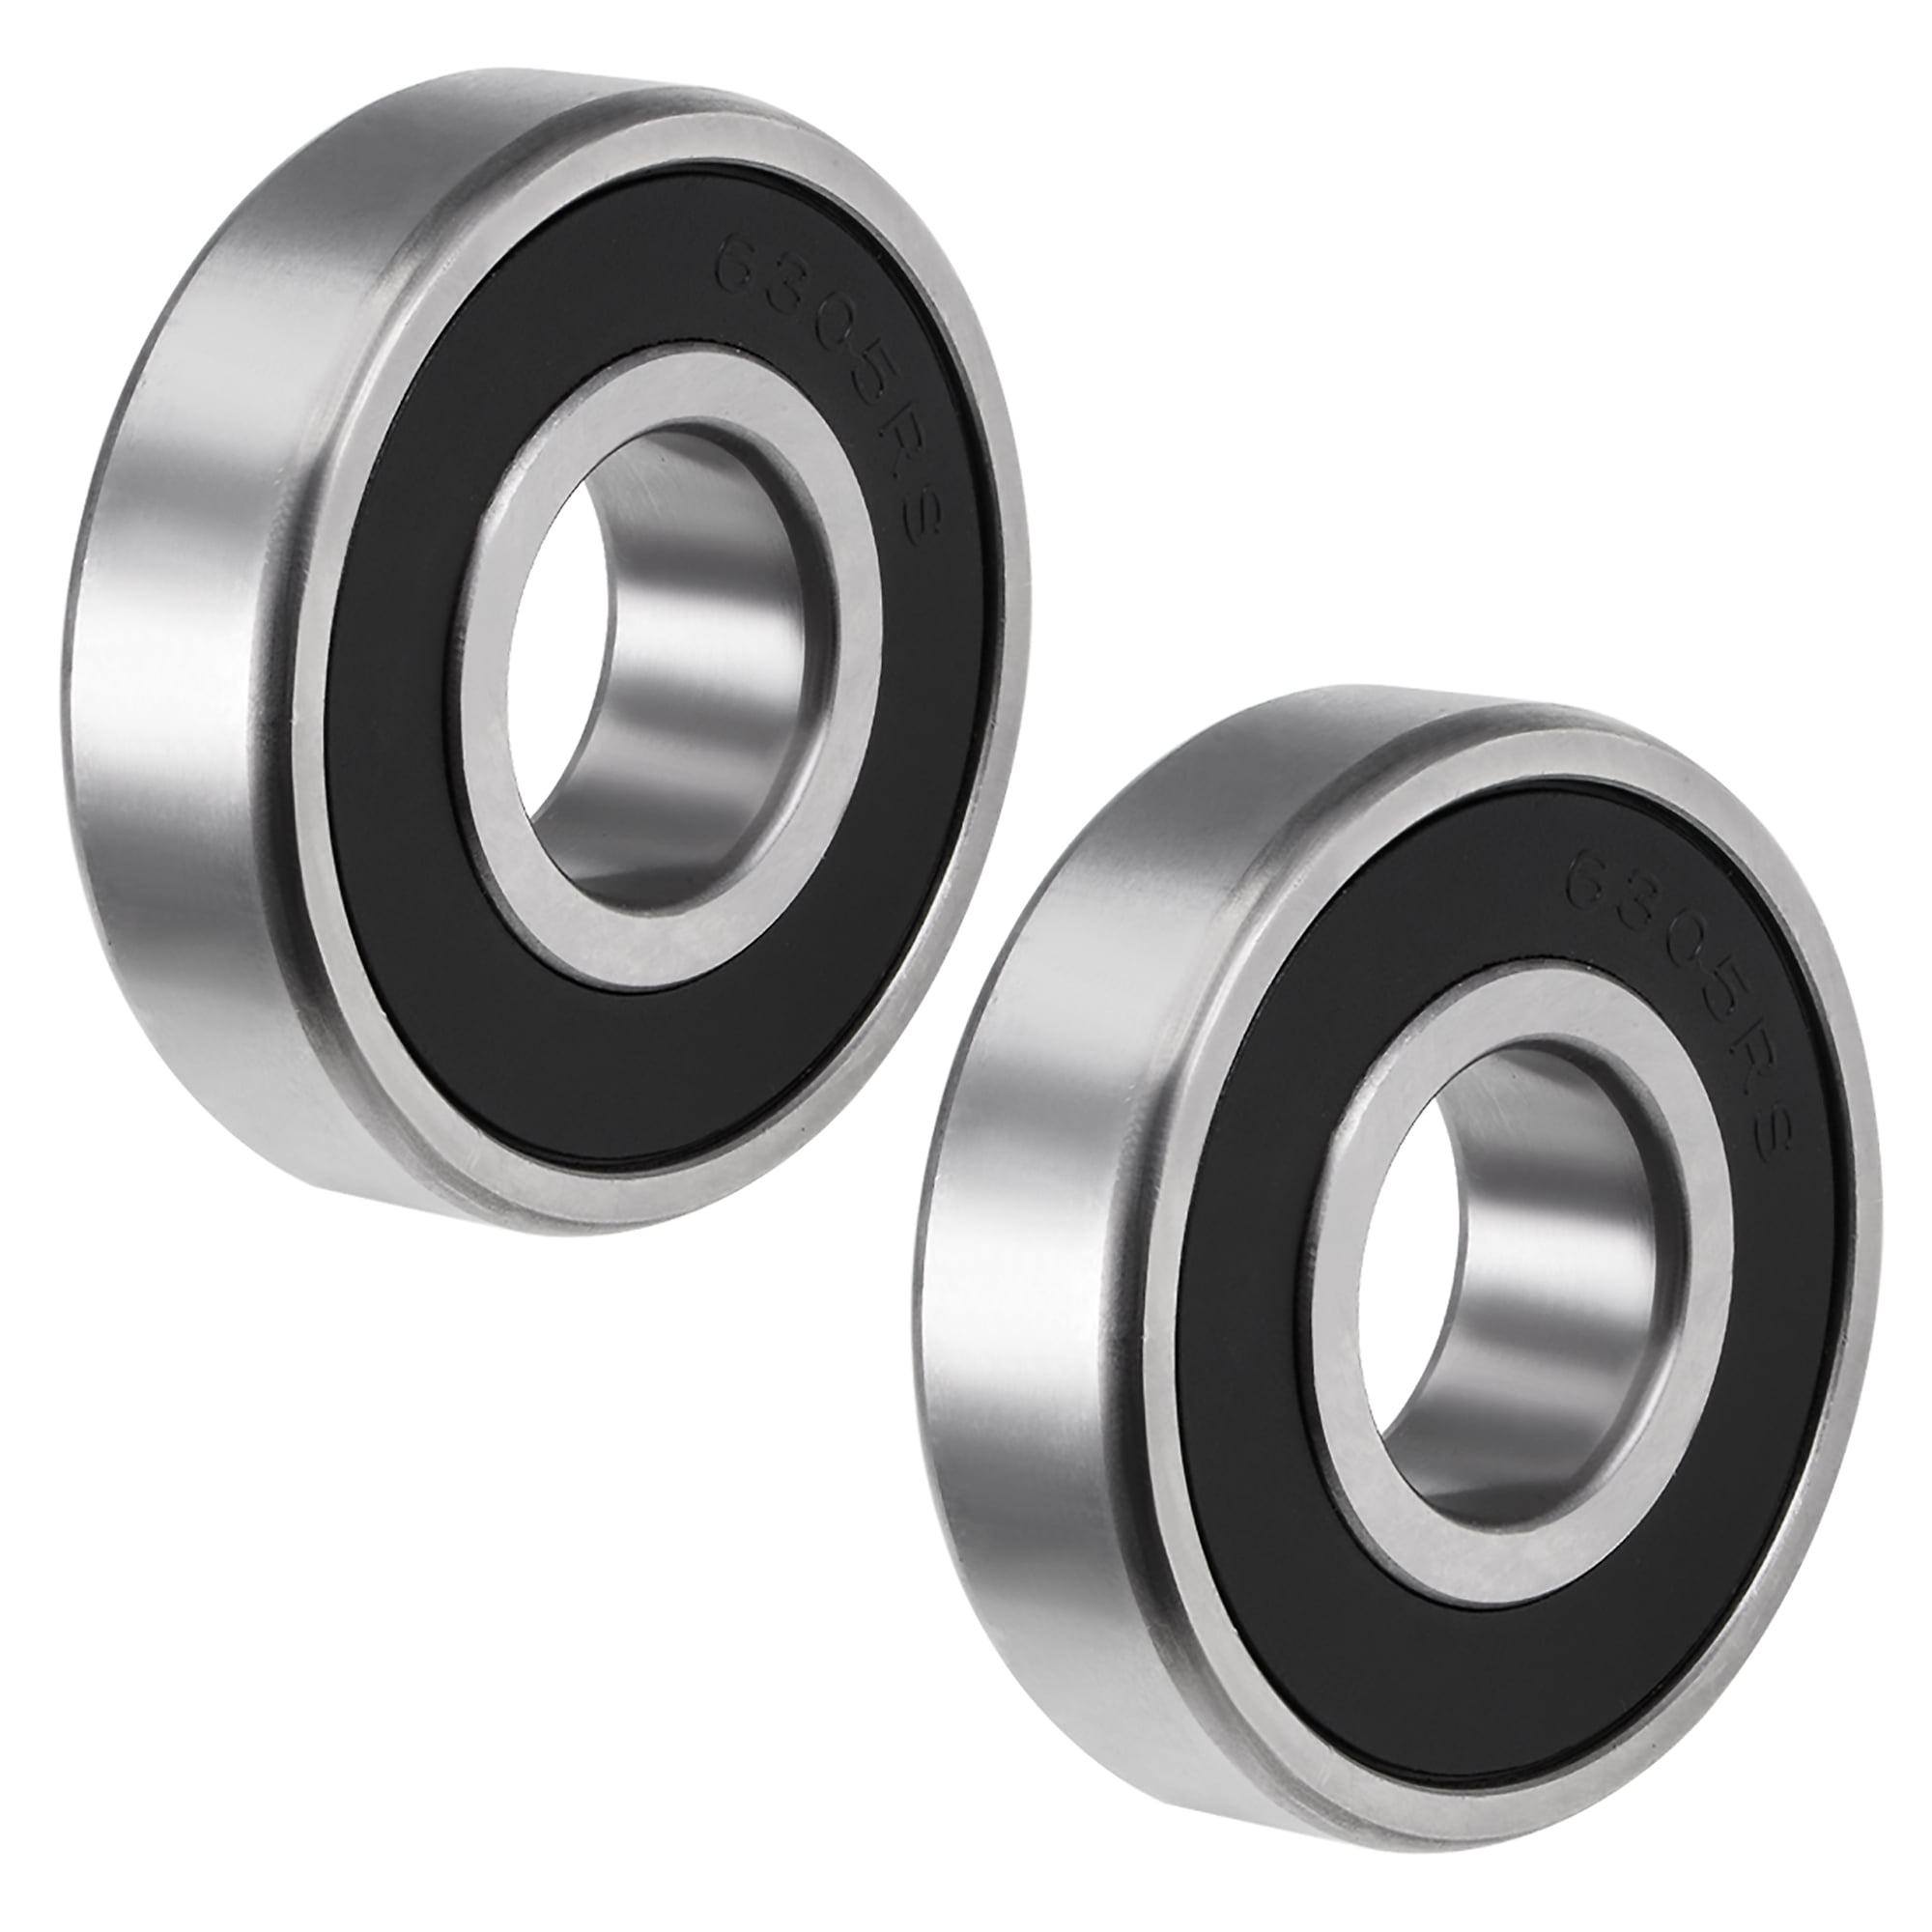 Double Seal and Pres-Lubricated,Rubber Sealed Bearing KSTE Deep Groove Ball Bearing Stable Performance and Cost-Effective 25 x 62 x 17mm（6305-2rs） 